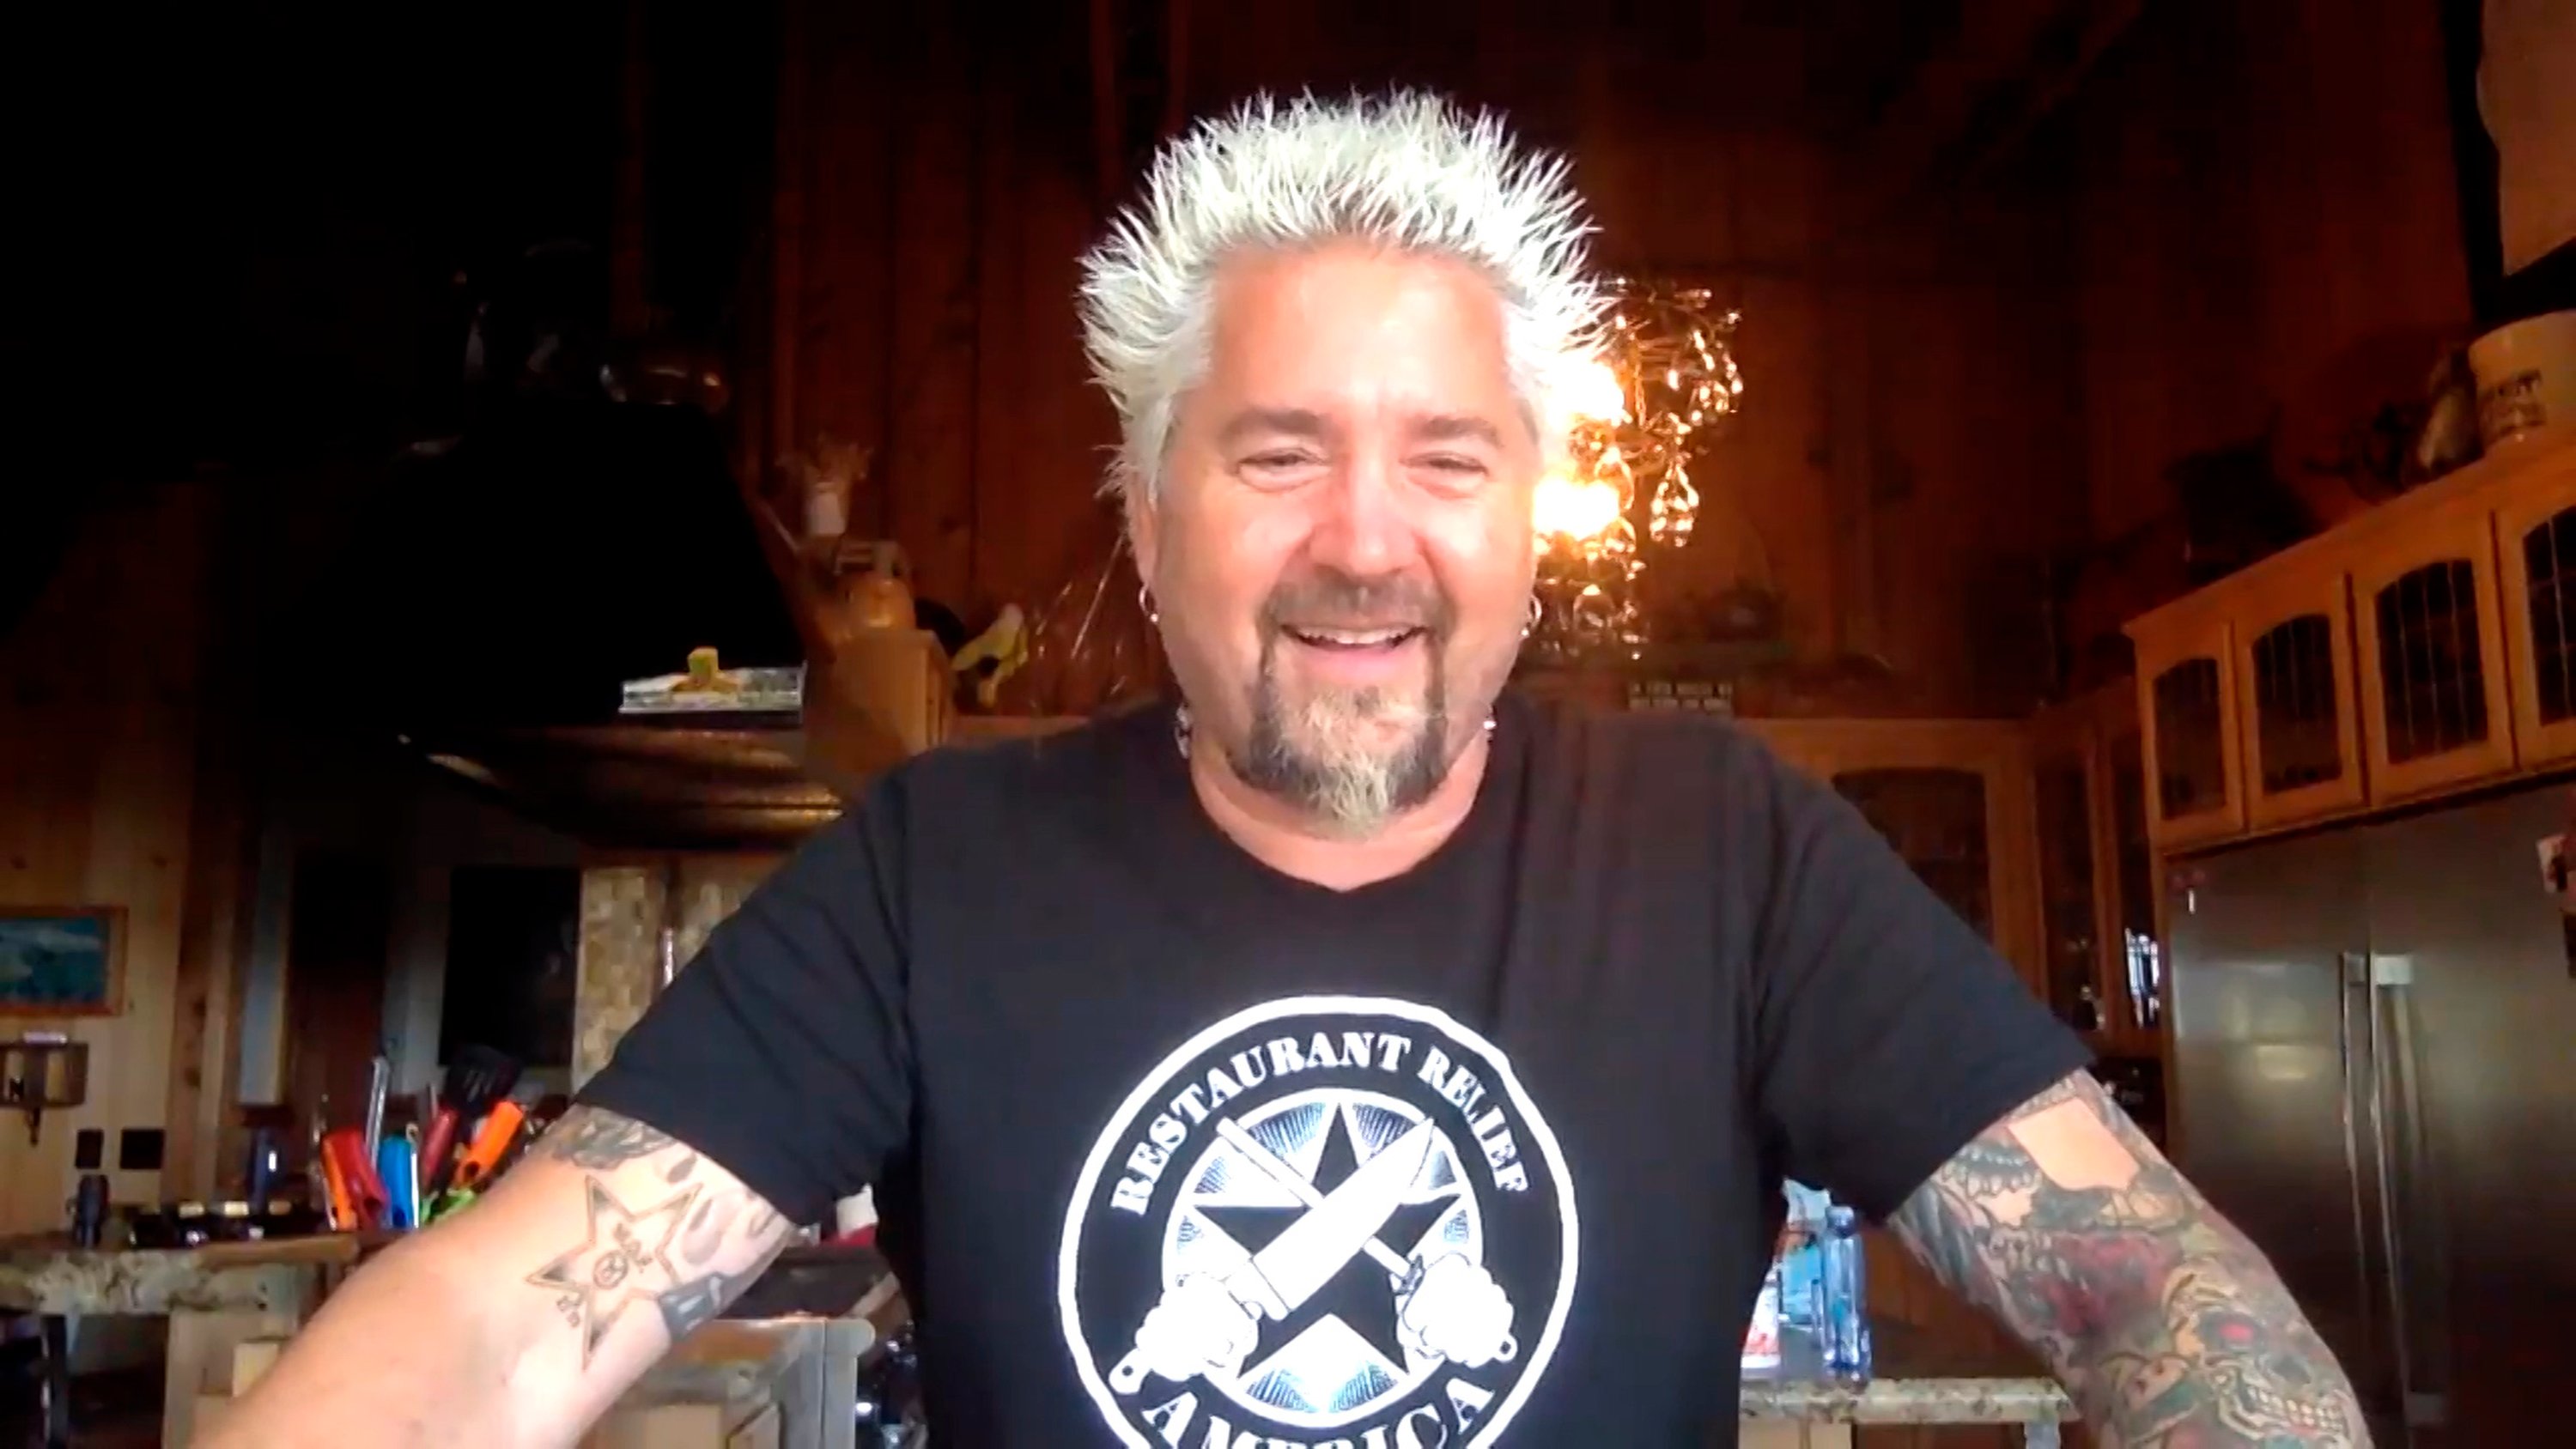 Guy Fieri looking happy as a virtual guest on 'The Tonight Show starring Jimmy Fallon'